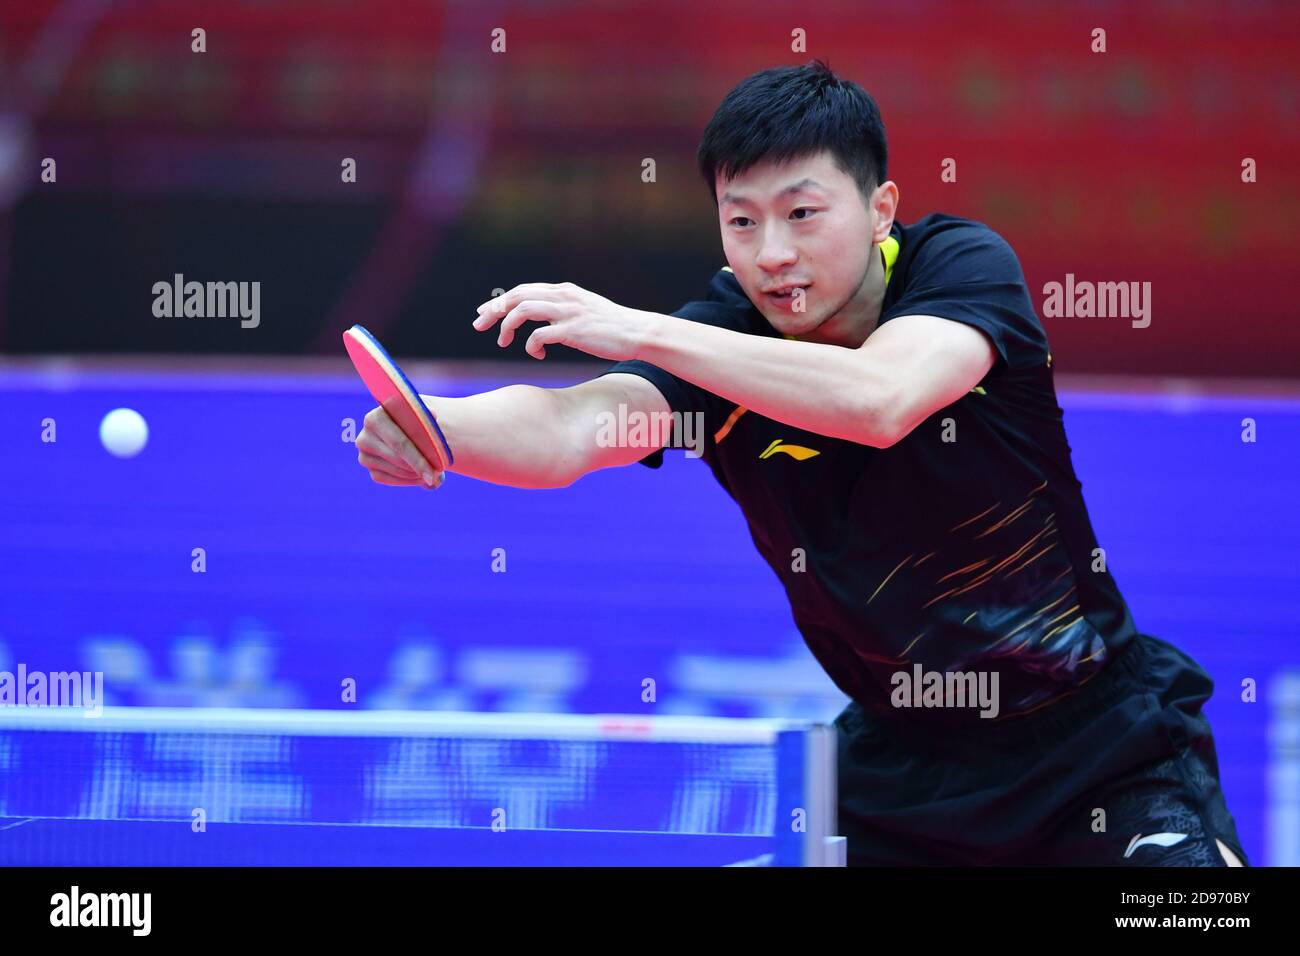 Chinese table tennis player Ma Long competes against Chinese table tennis player Fan Zhendong at the final of 2020 China National Table Tennis Championships, Weihai city, east China’s Shandong province, 10 October 2020. Stock Photo